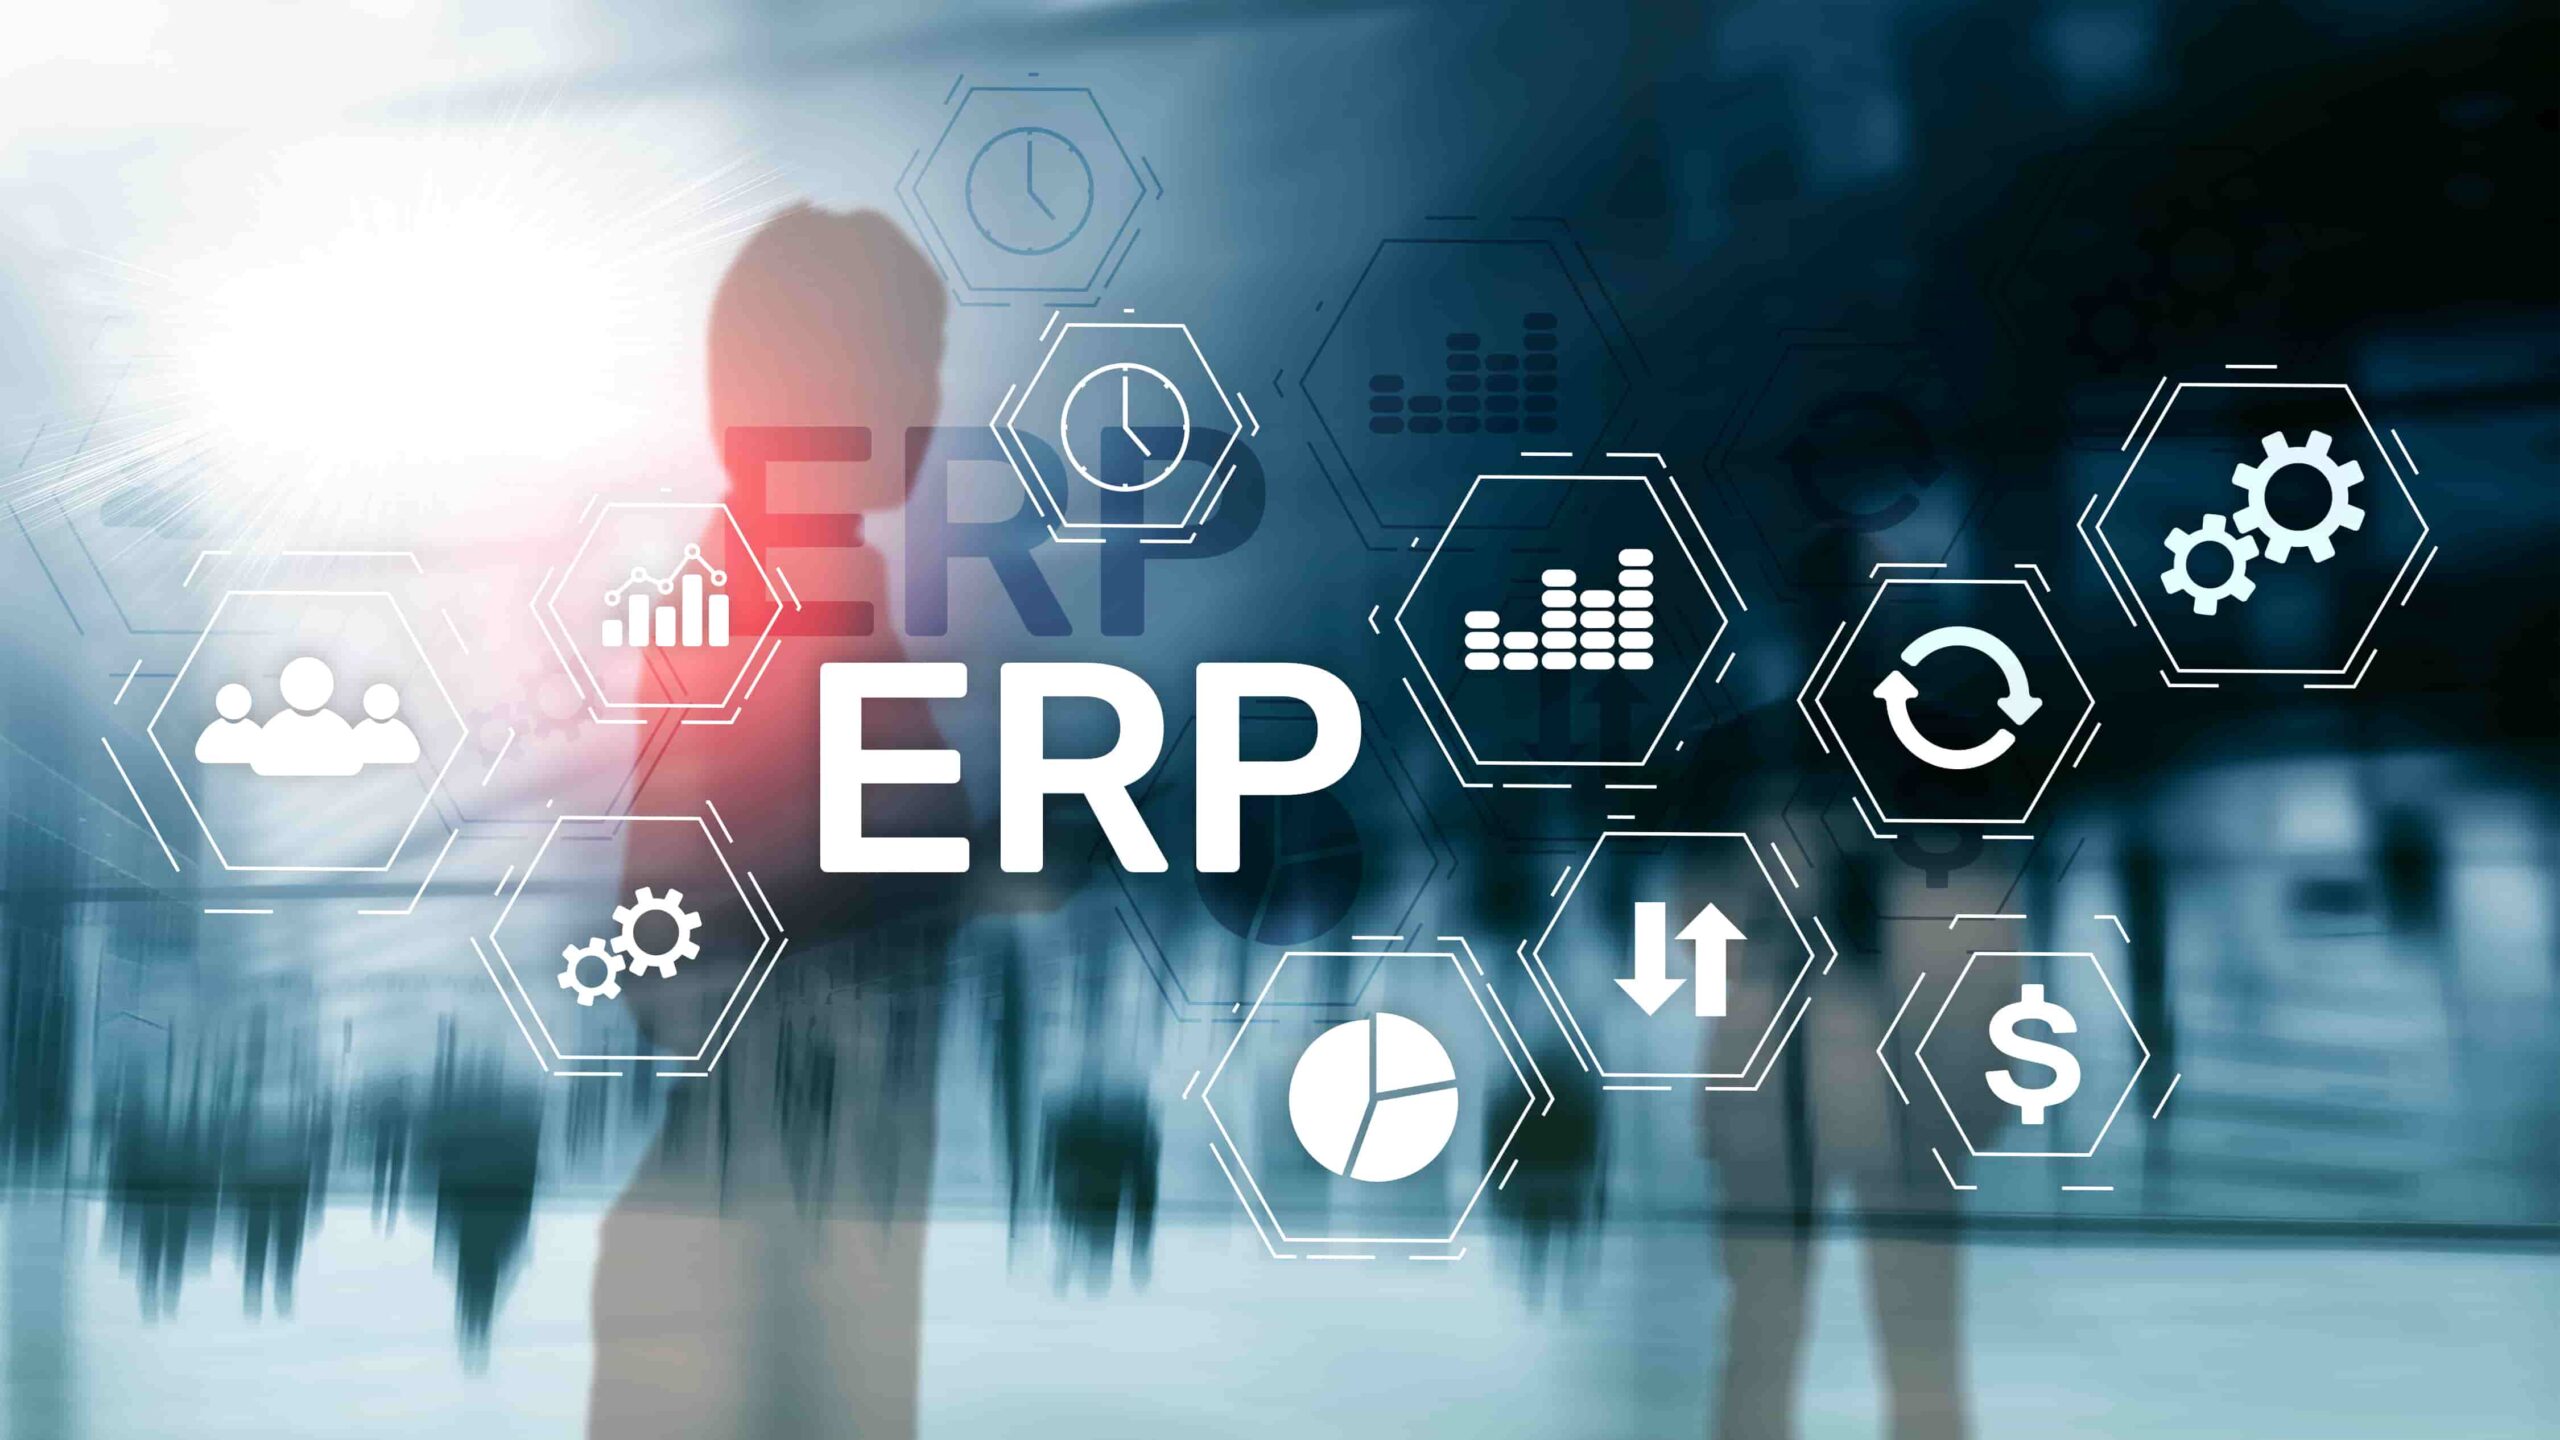 How to use an ERP to improve your sales? Mhas